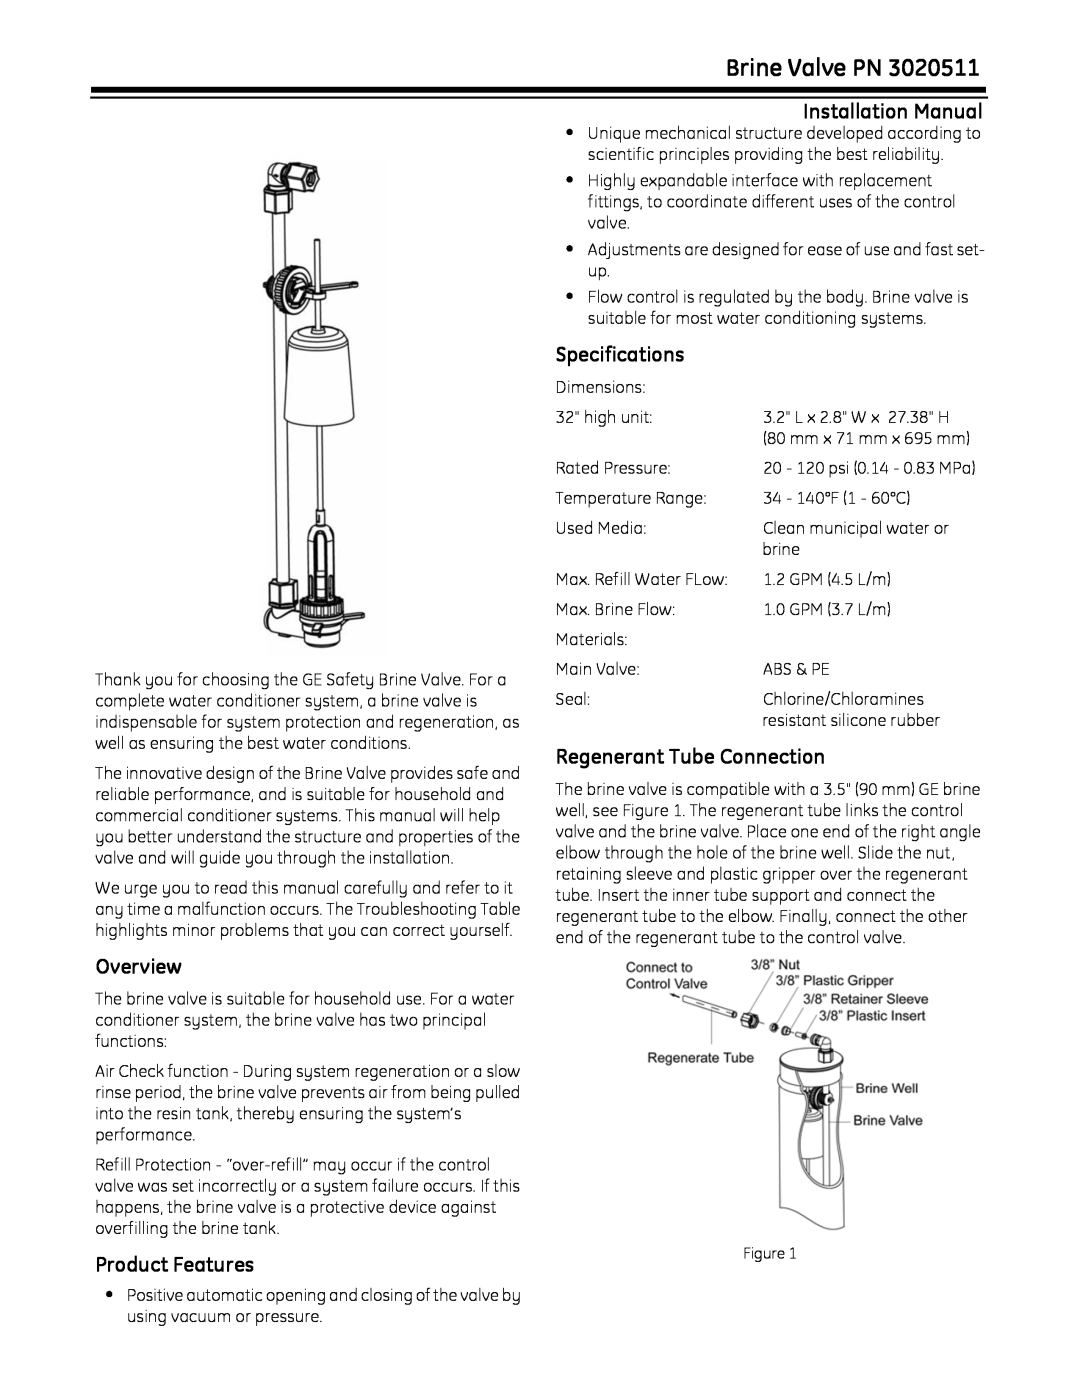 GE 3020511 installation manual Brine Valve PN, Overview, Product Features, Installation Manual, Specifications 